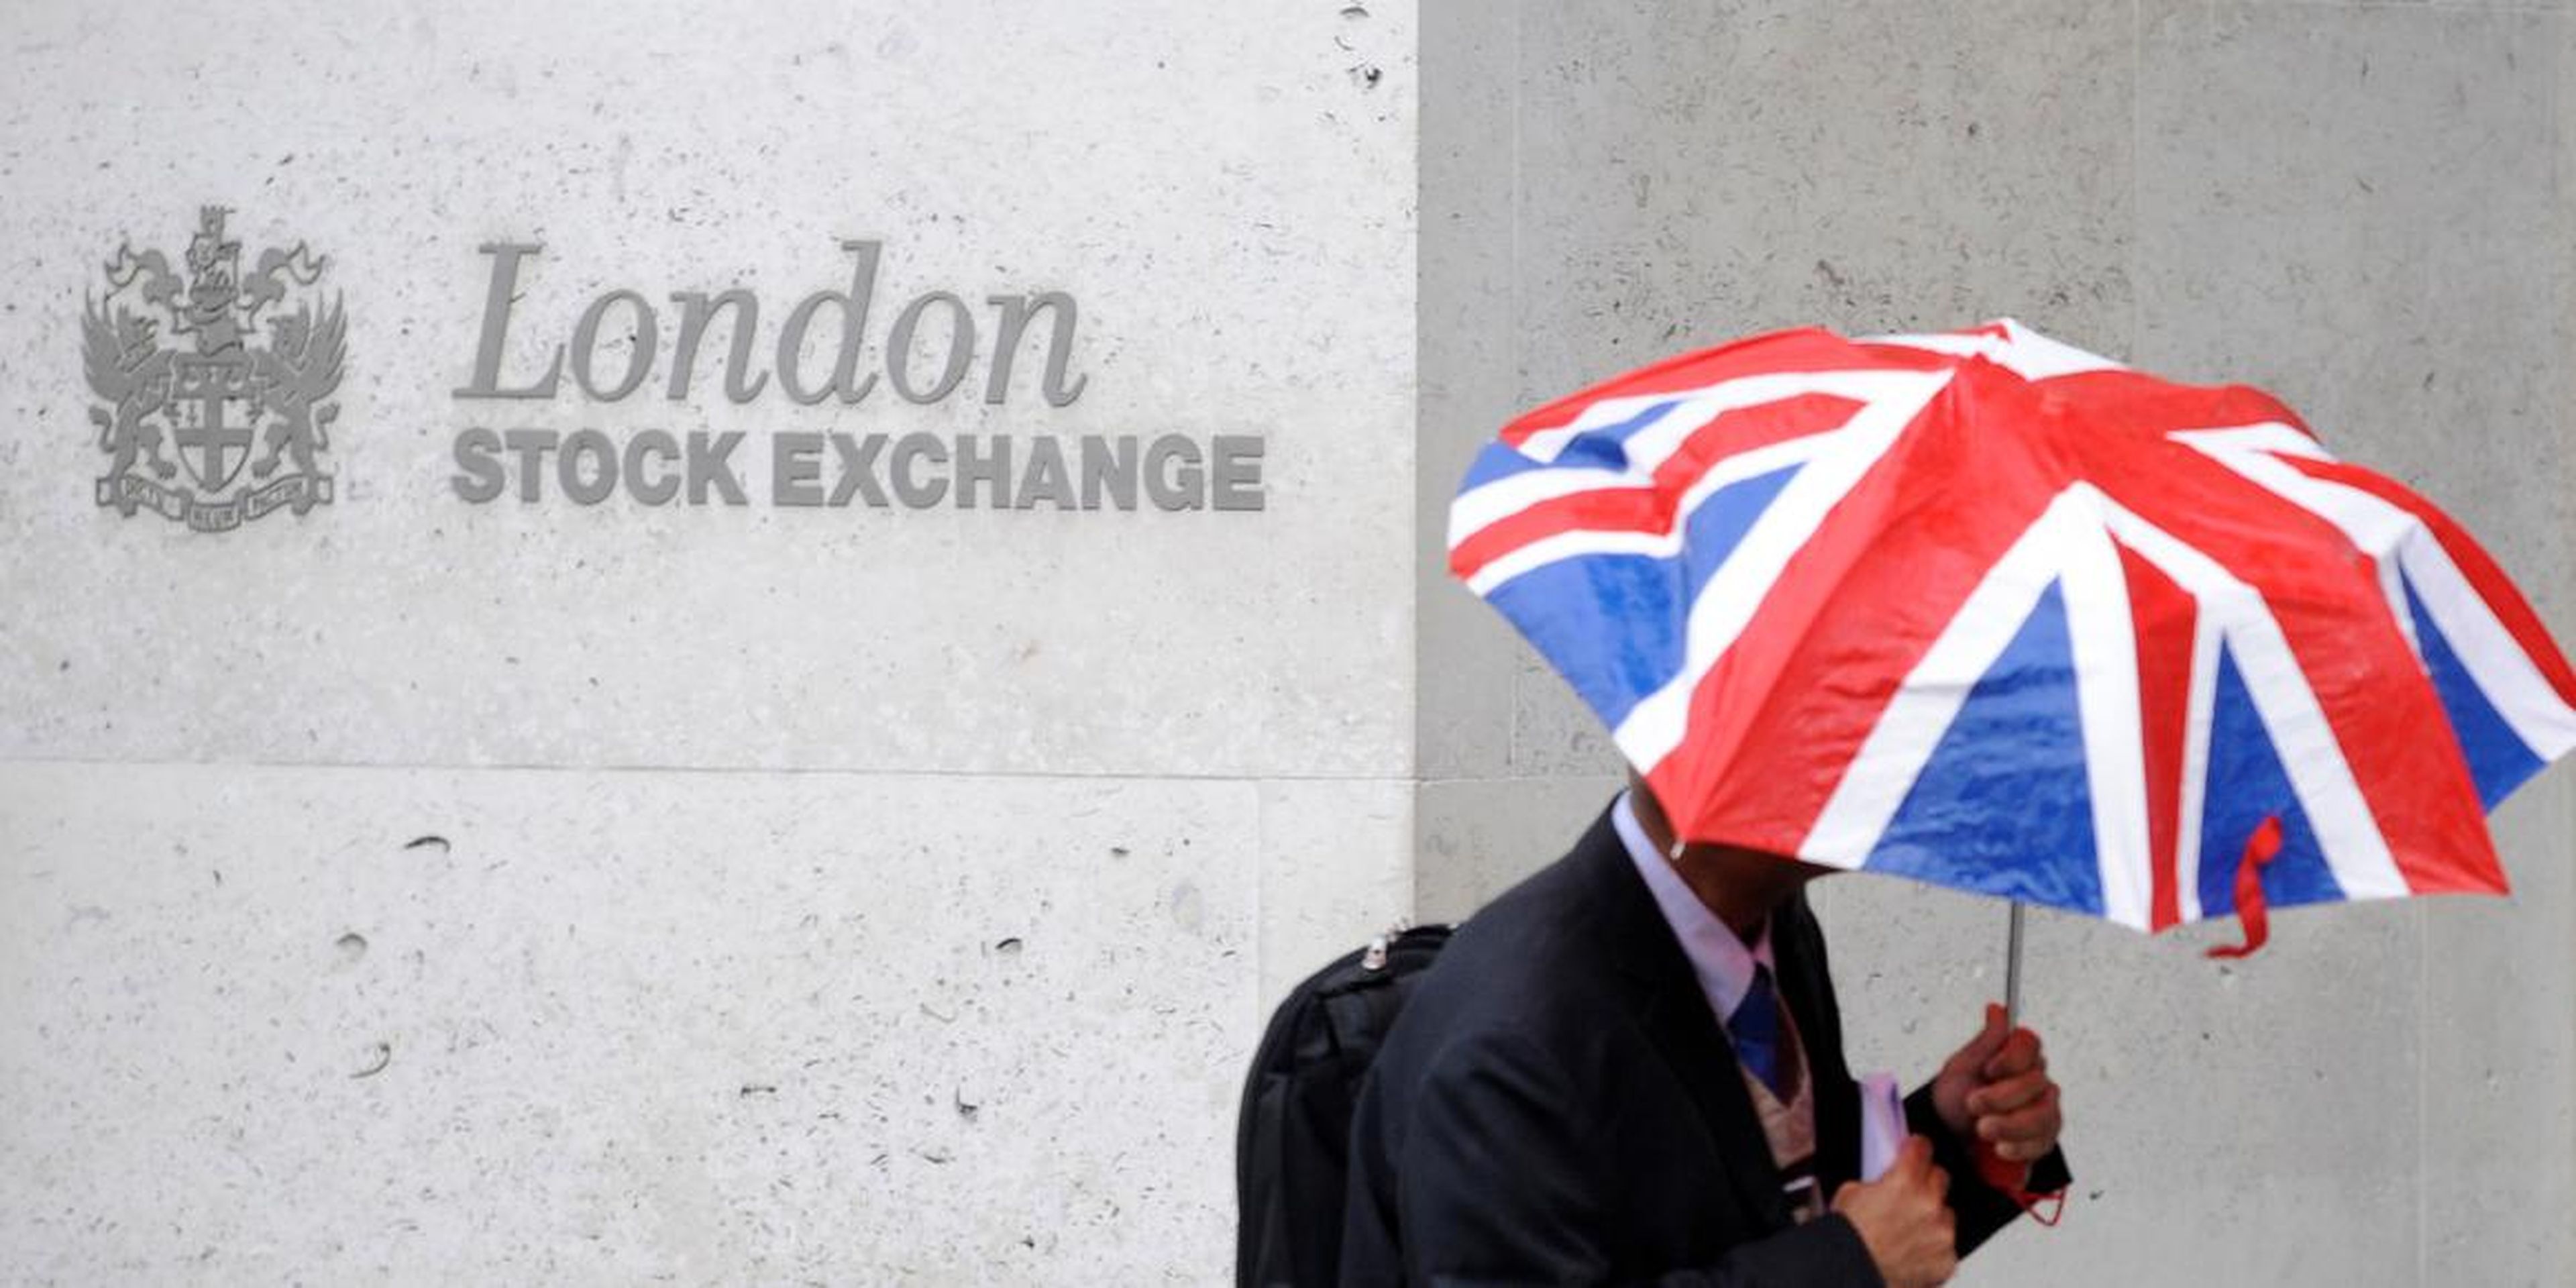 Hong Kong Stock Exchange dropped its $36 billion bid for its London rival after the LSE snubbed it